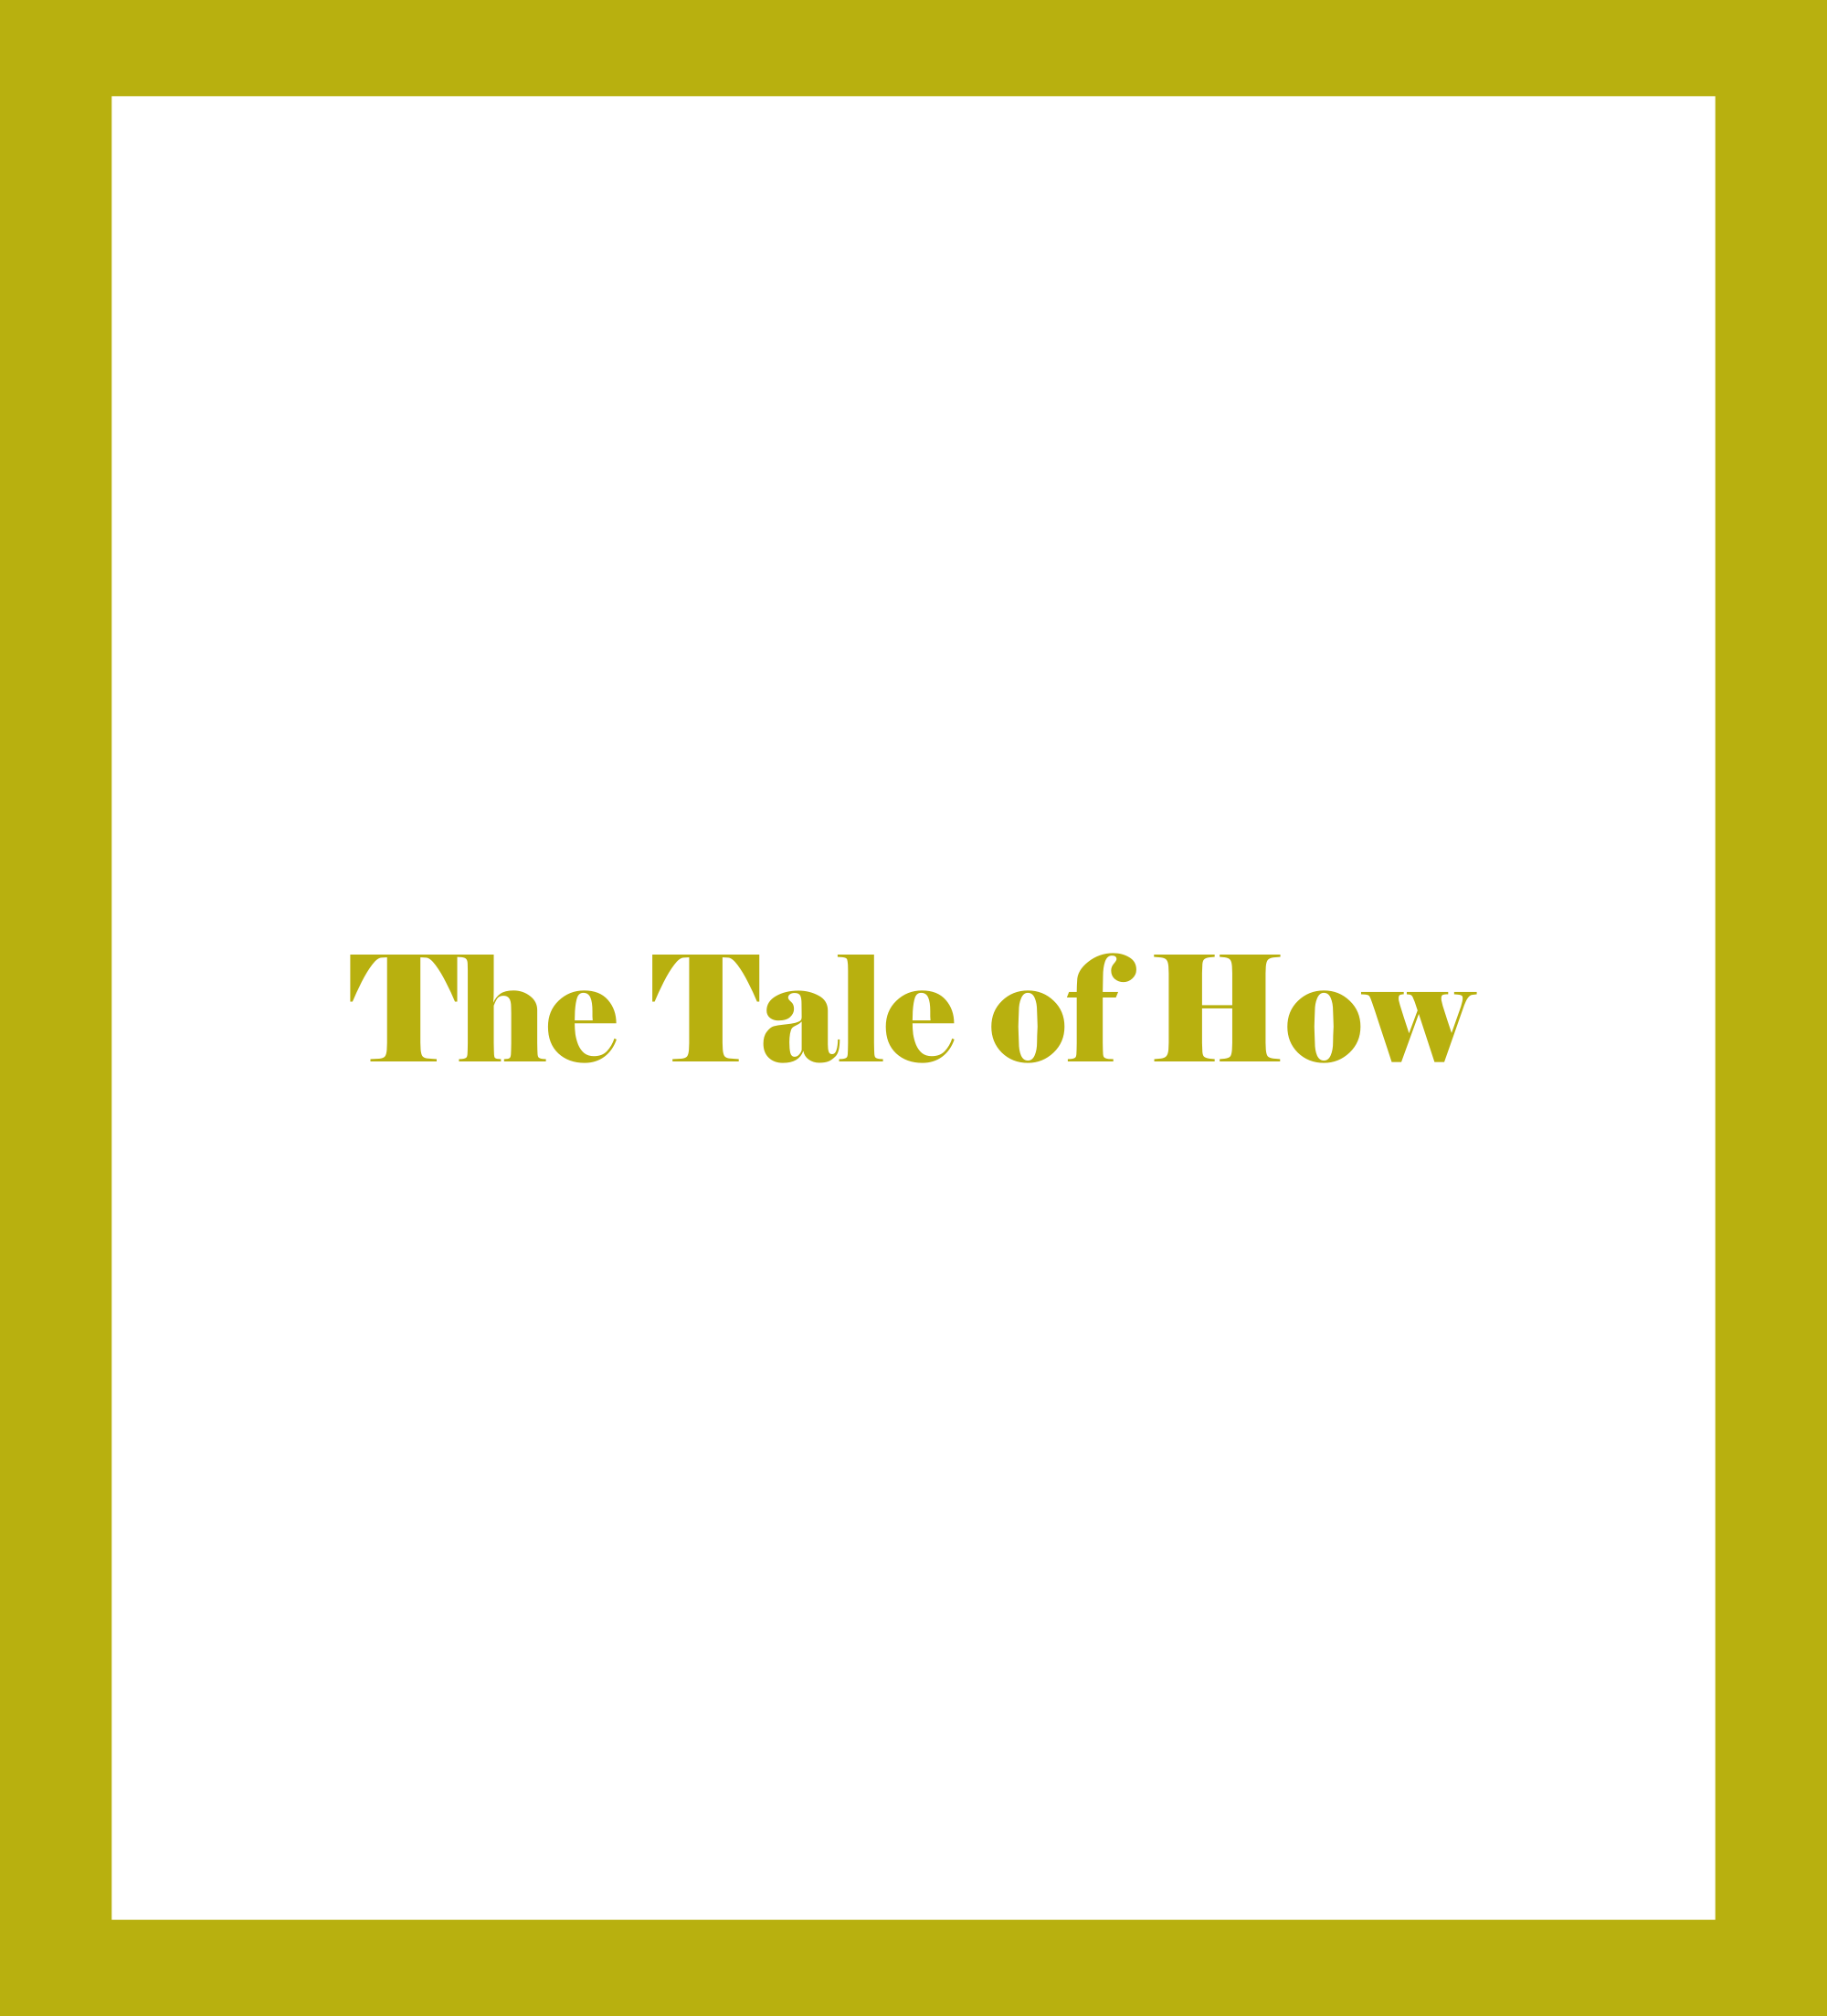 Caratula de The Tale of How (The Tale of How) 